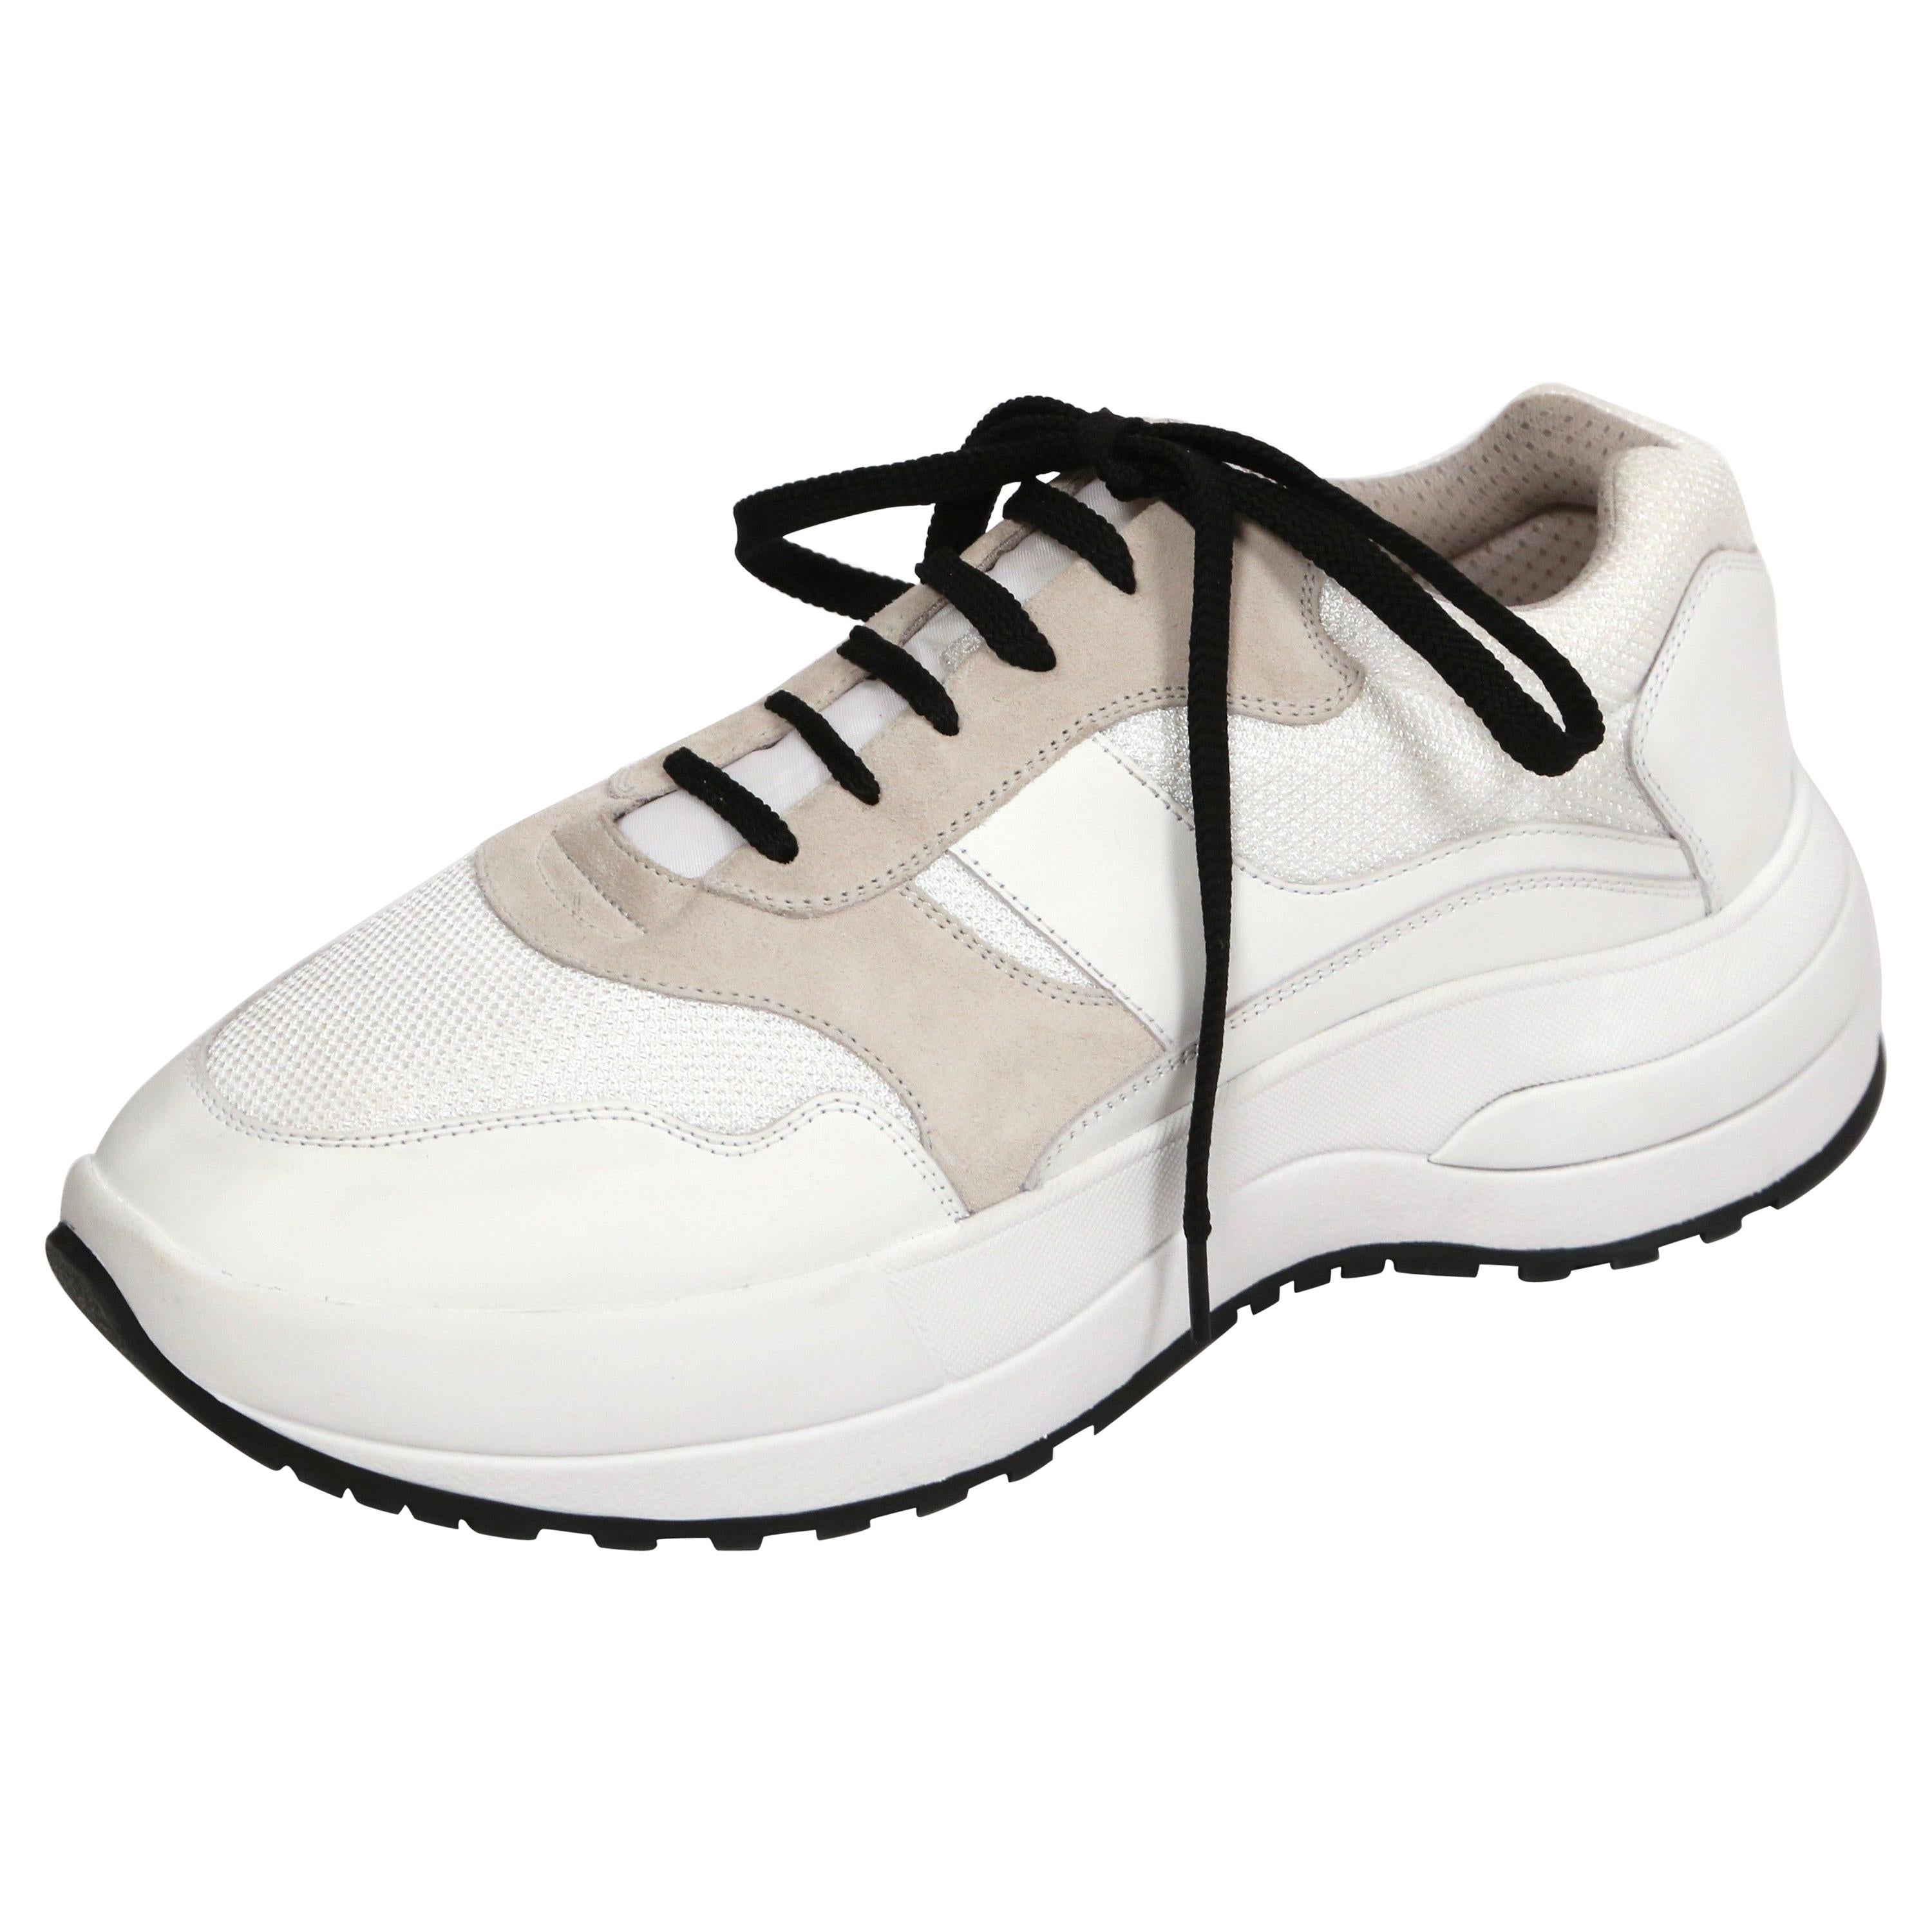 CELINE by PHOEBE white leather 'Delivery' sneakers - 41 - NEW For Sale at 1stDibs celine delivery sneakers, celine phoebe philo sneakers